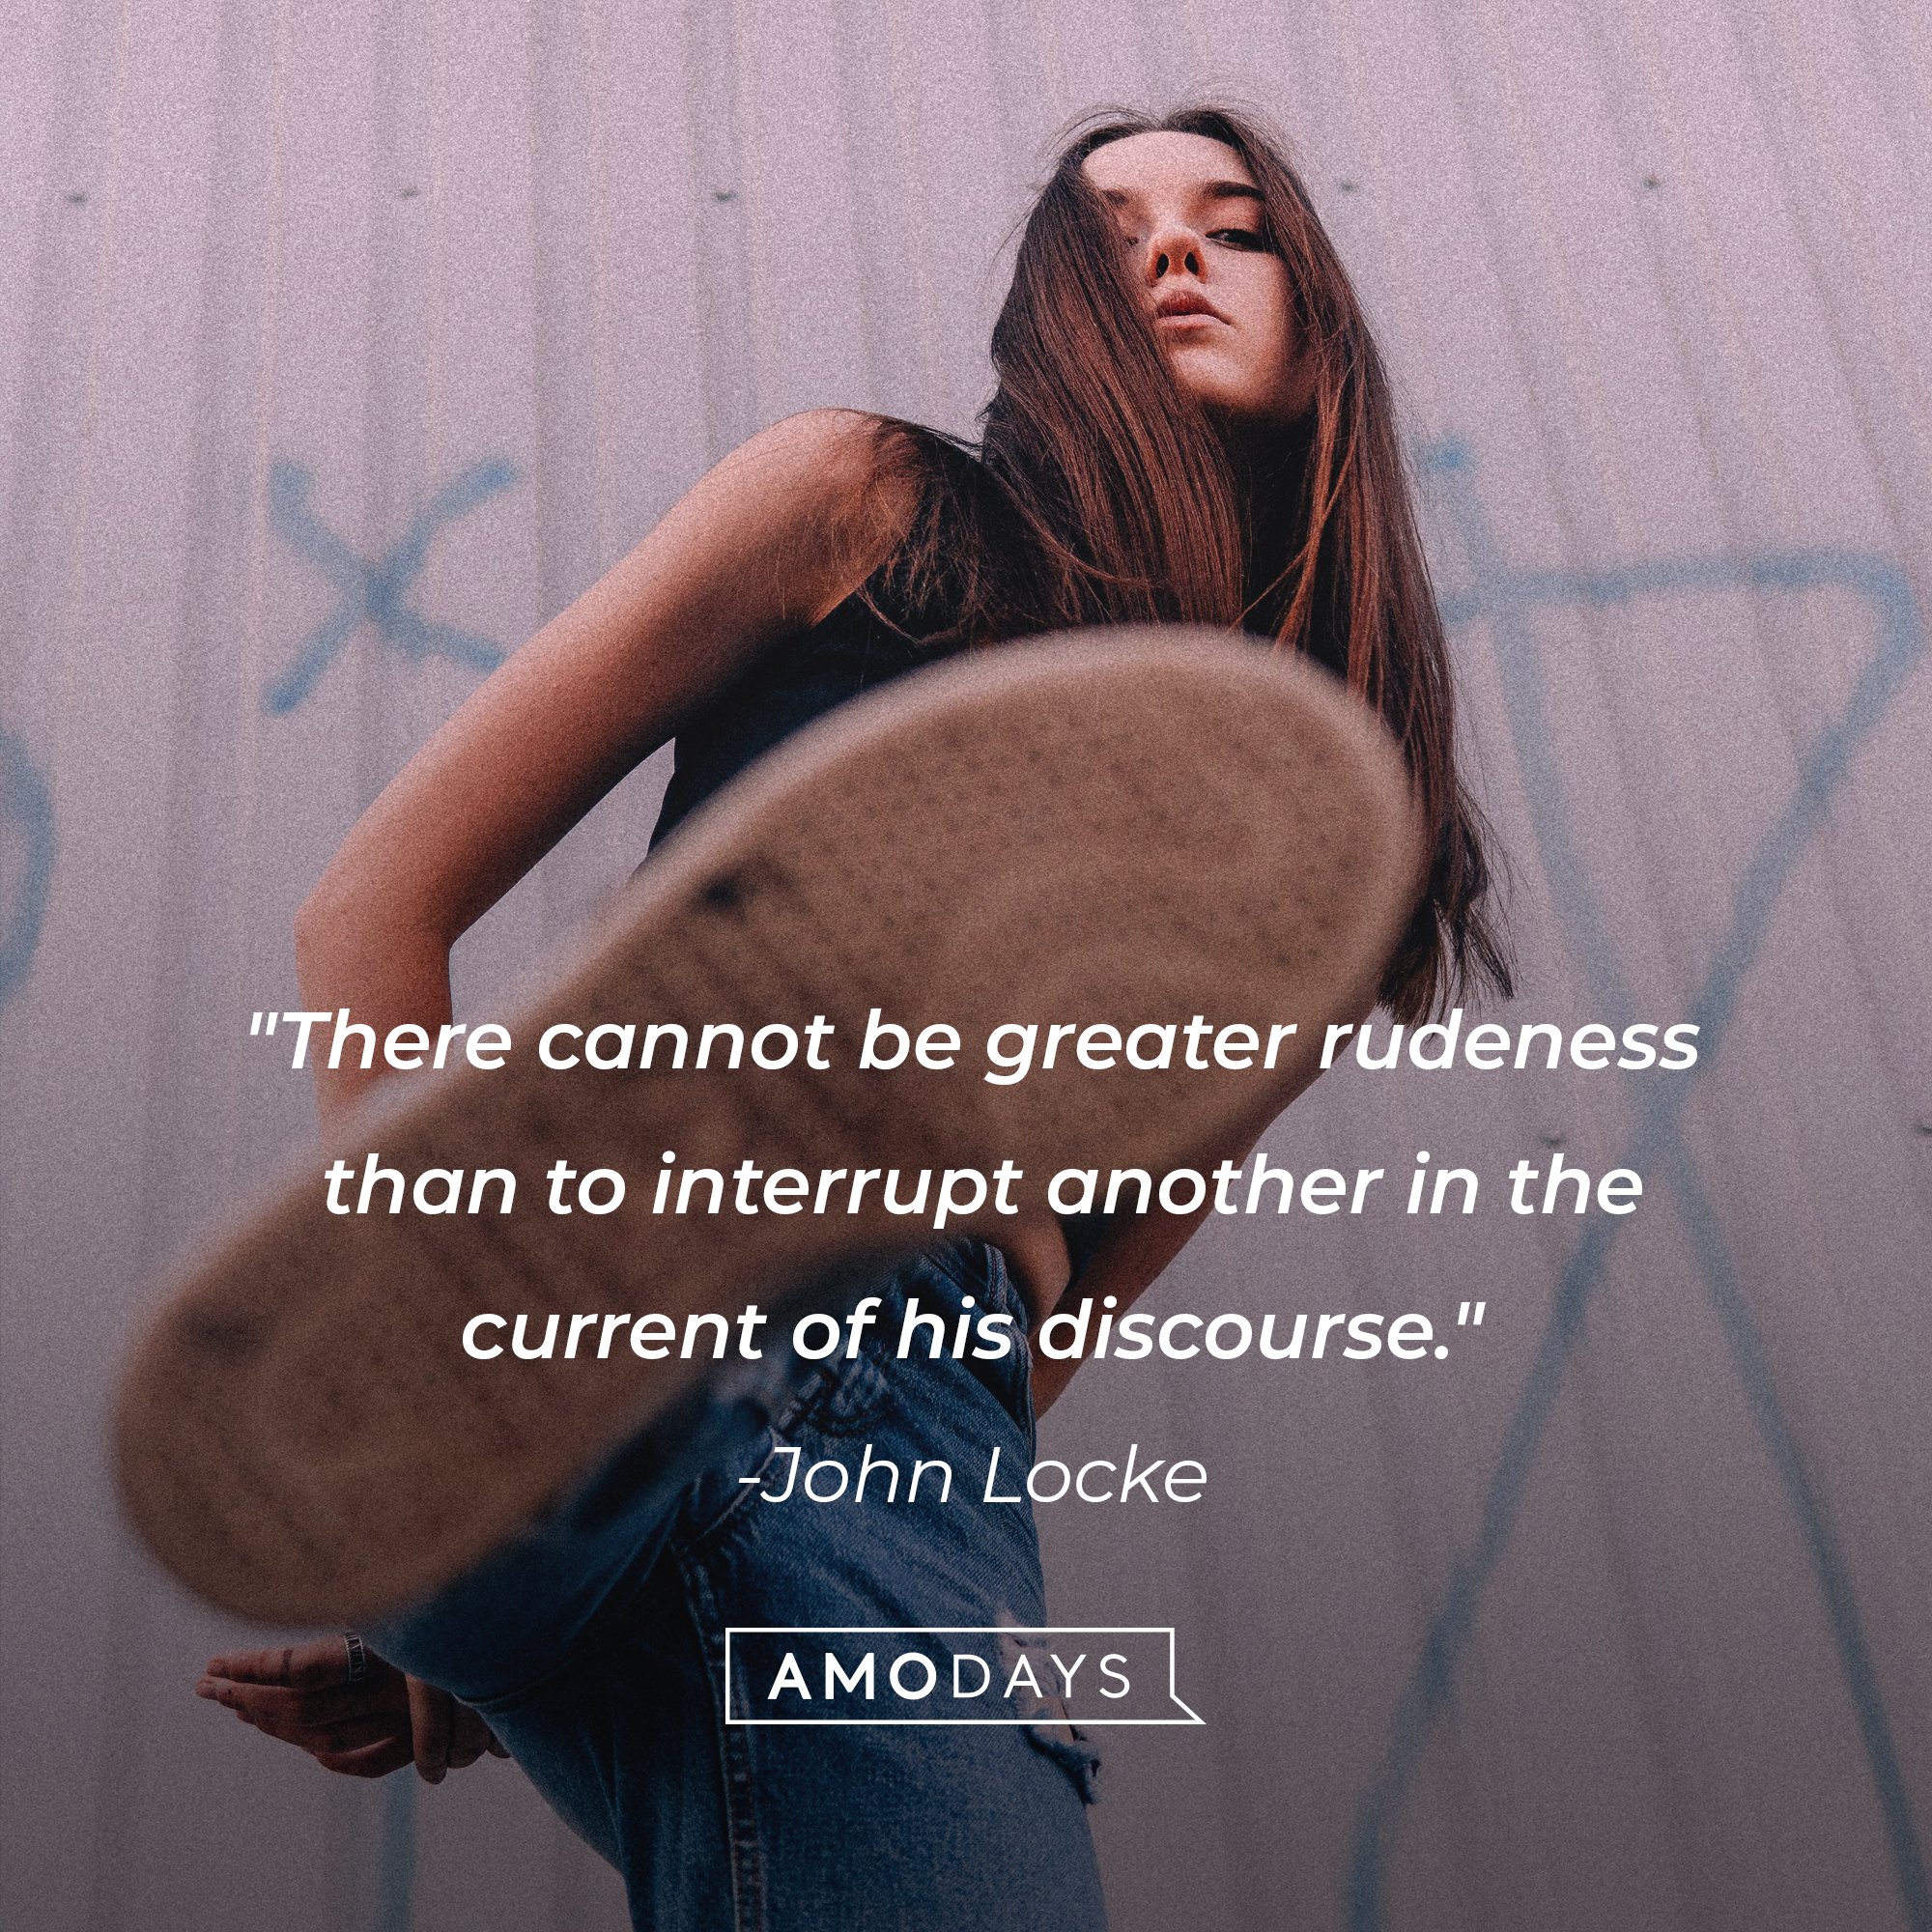 John Locke’s quote: "There cannot be greater rudeness than to interrupt another in the current of his discourse." | Image: AmoDays